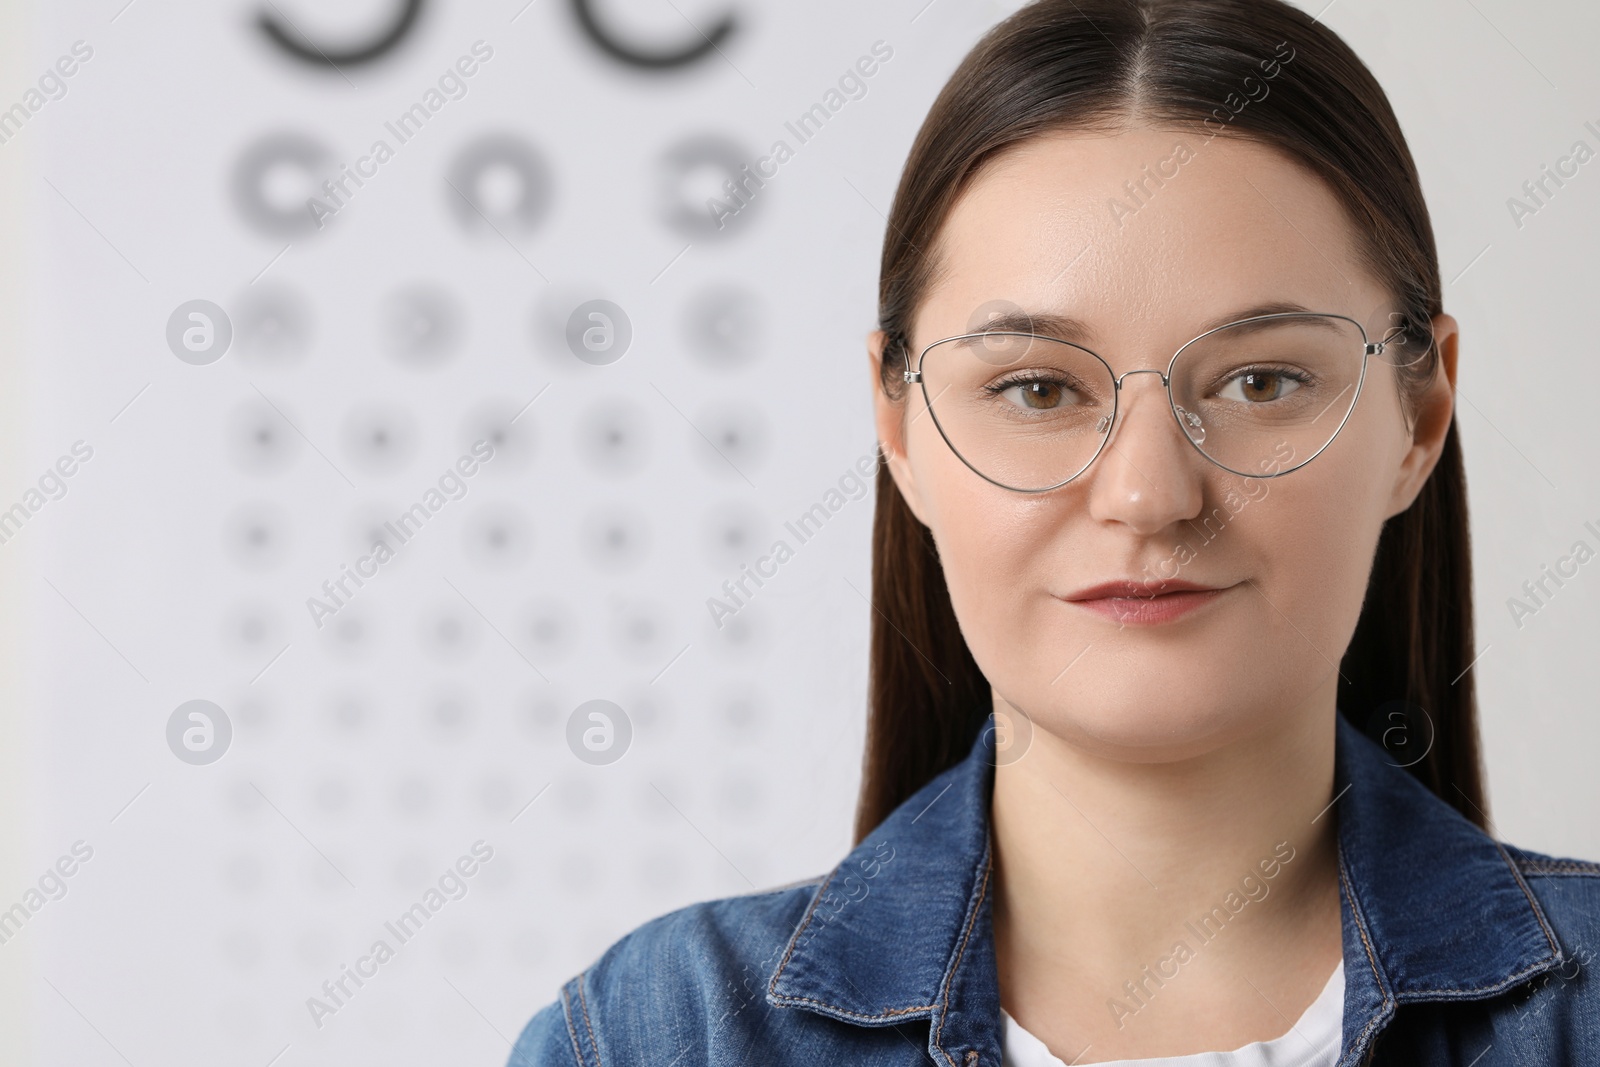 Photo of Young woman with glasses against vision test chart